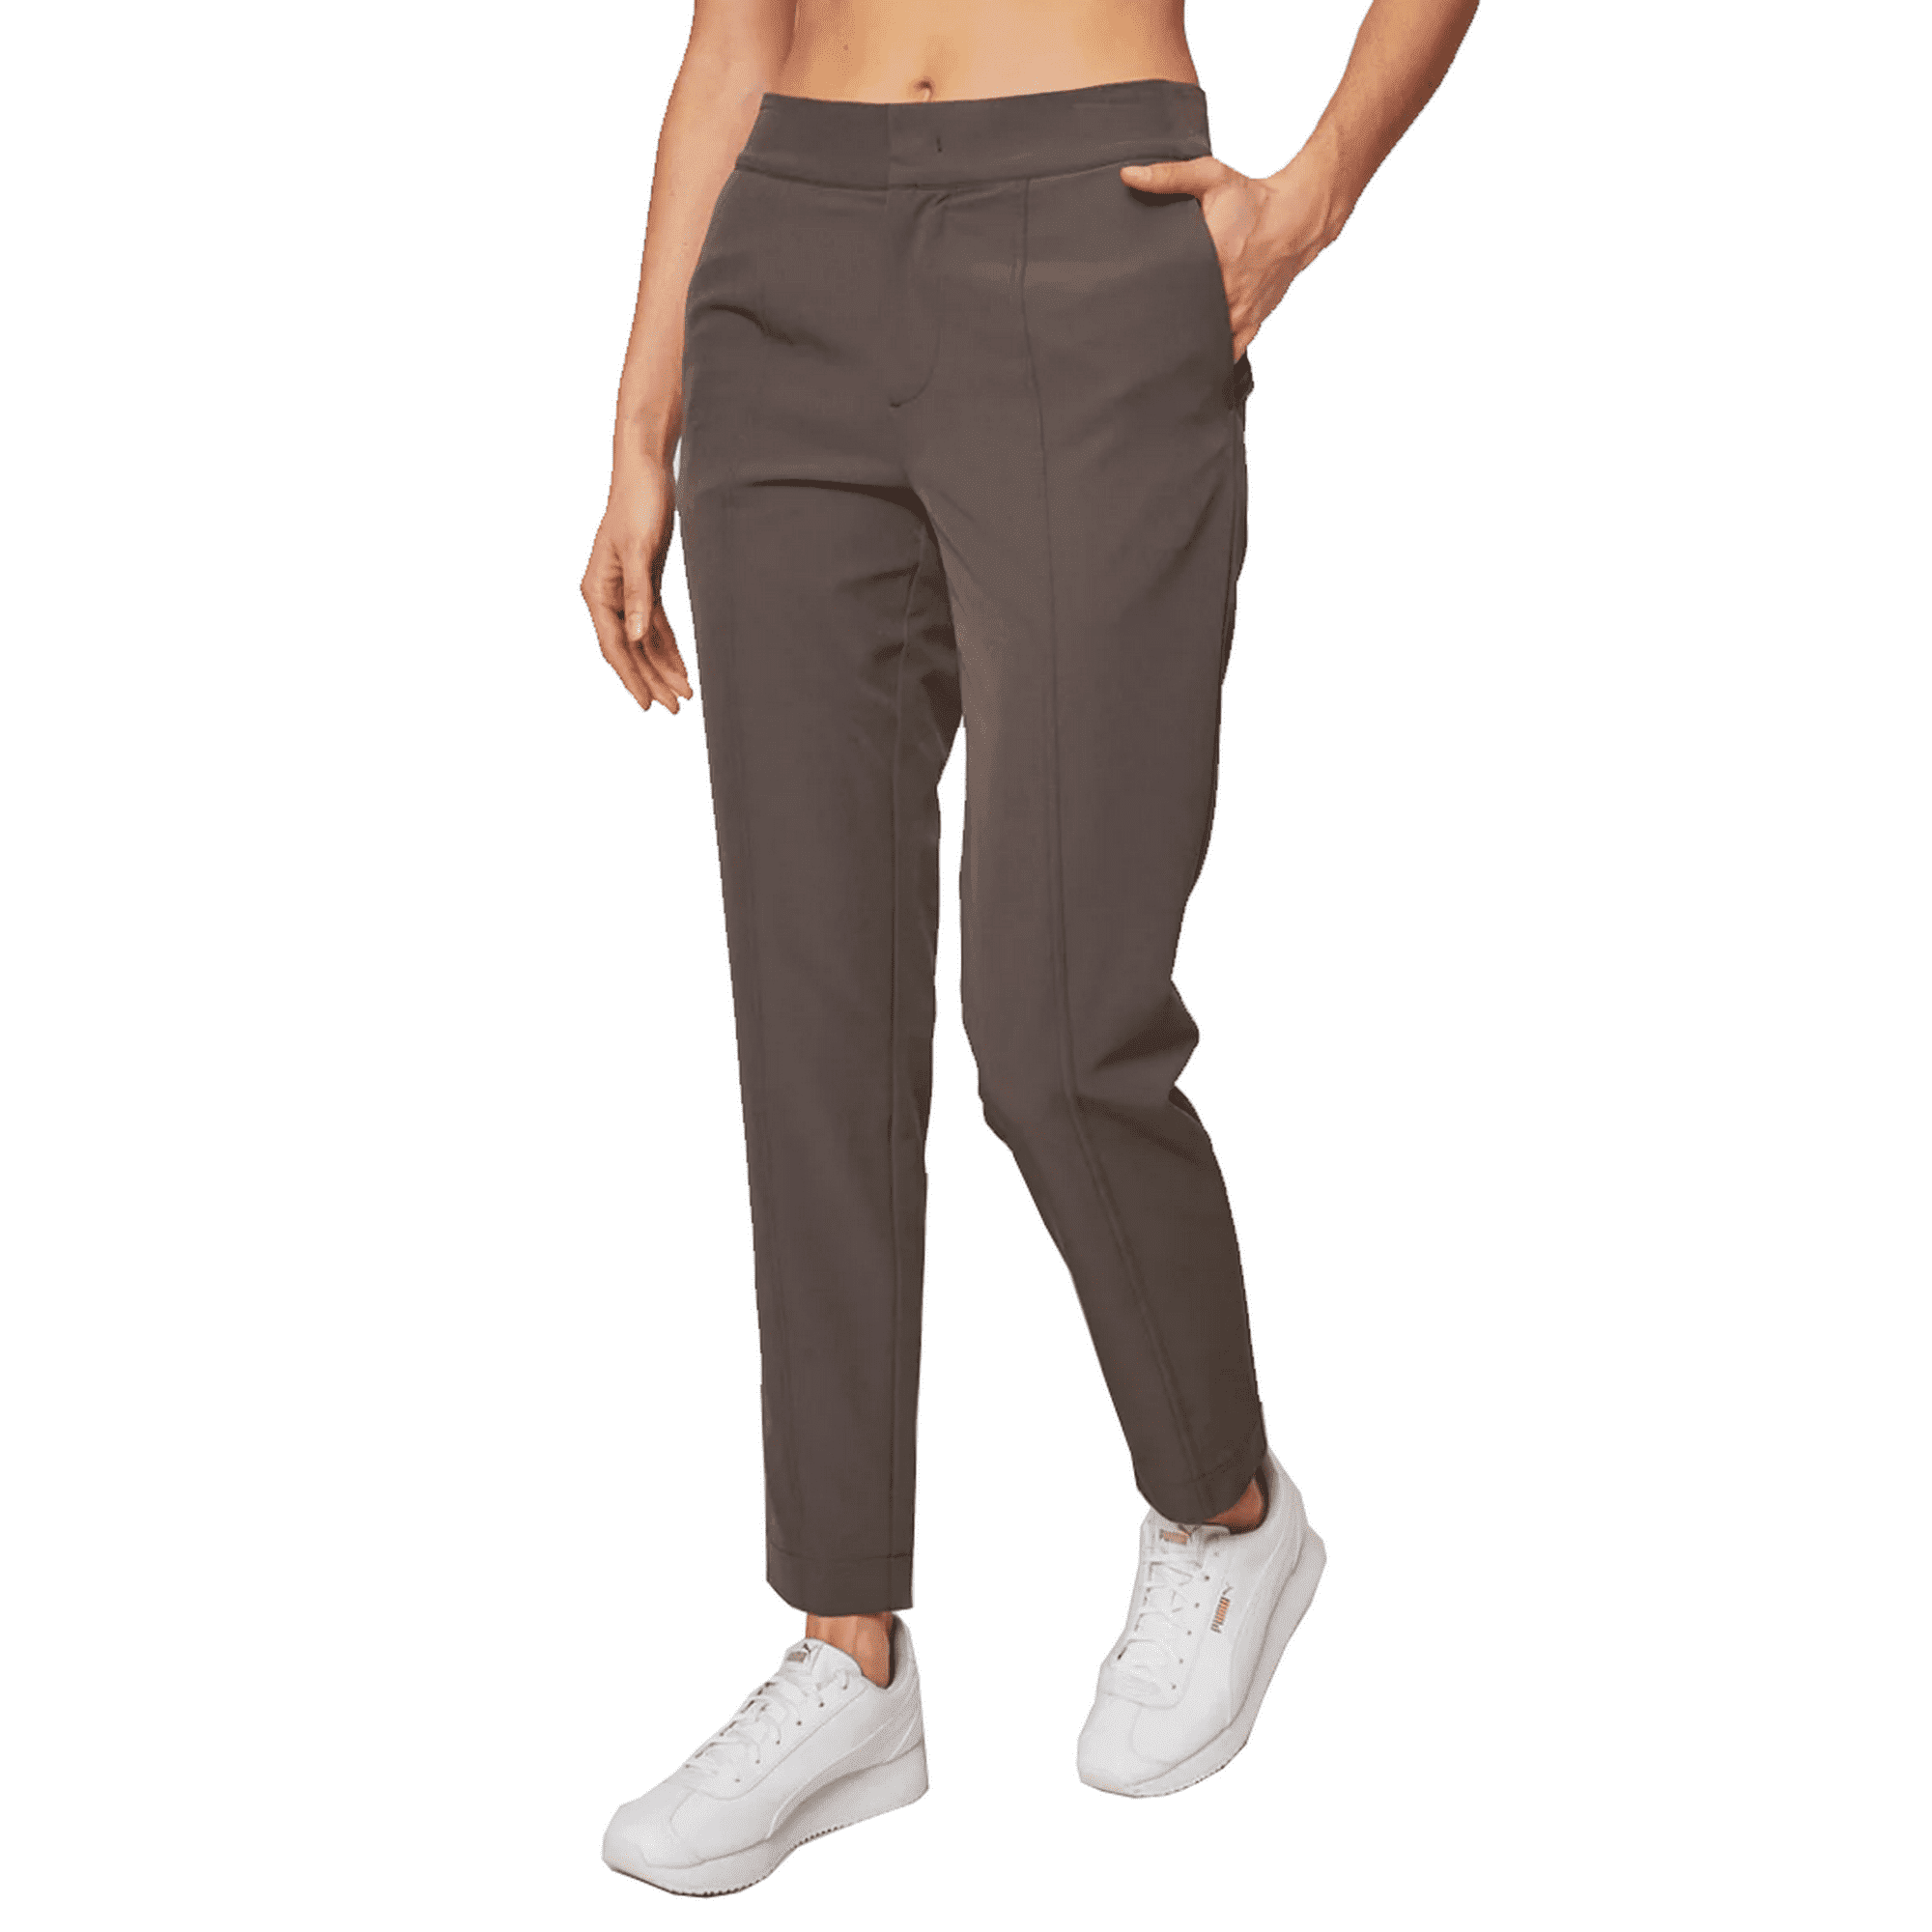 MONDETTA Ladies' Lined Tailored Travel Pants High-Rise Comfort Stretch w' Pockets